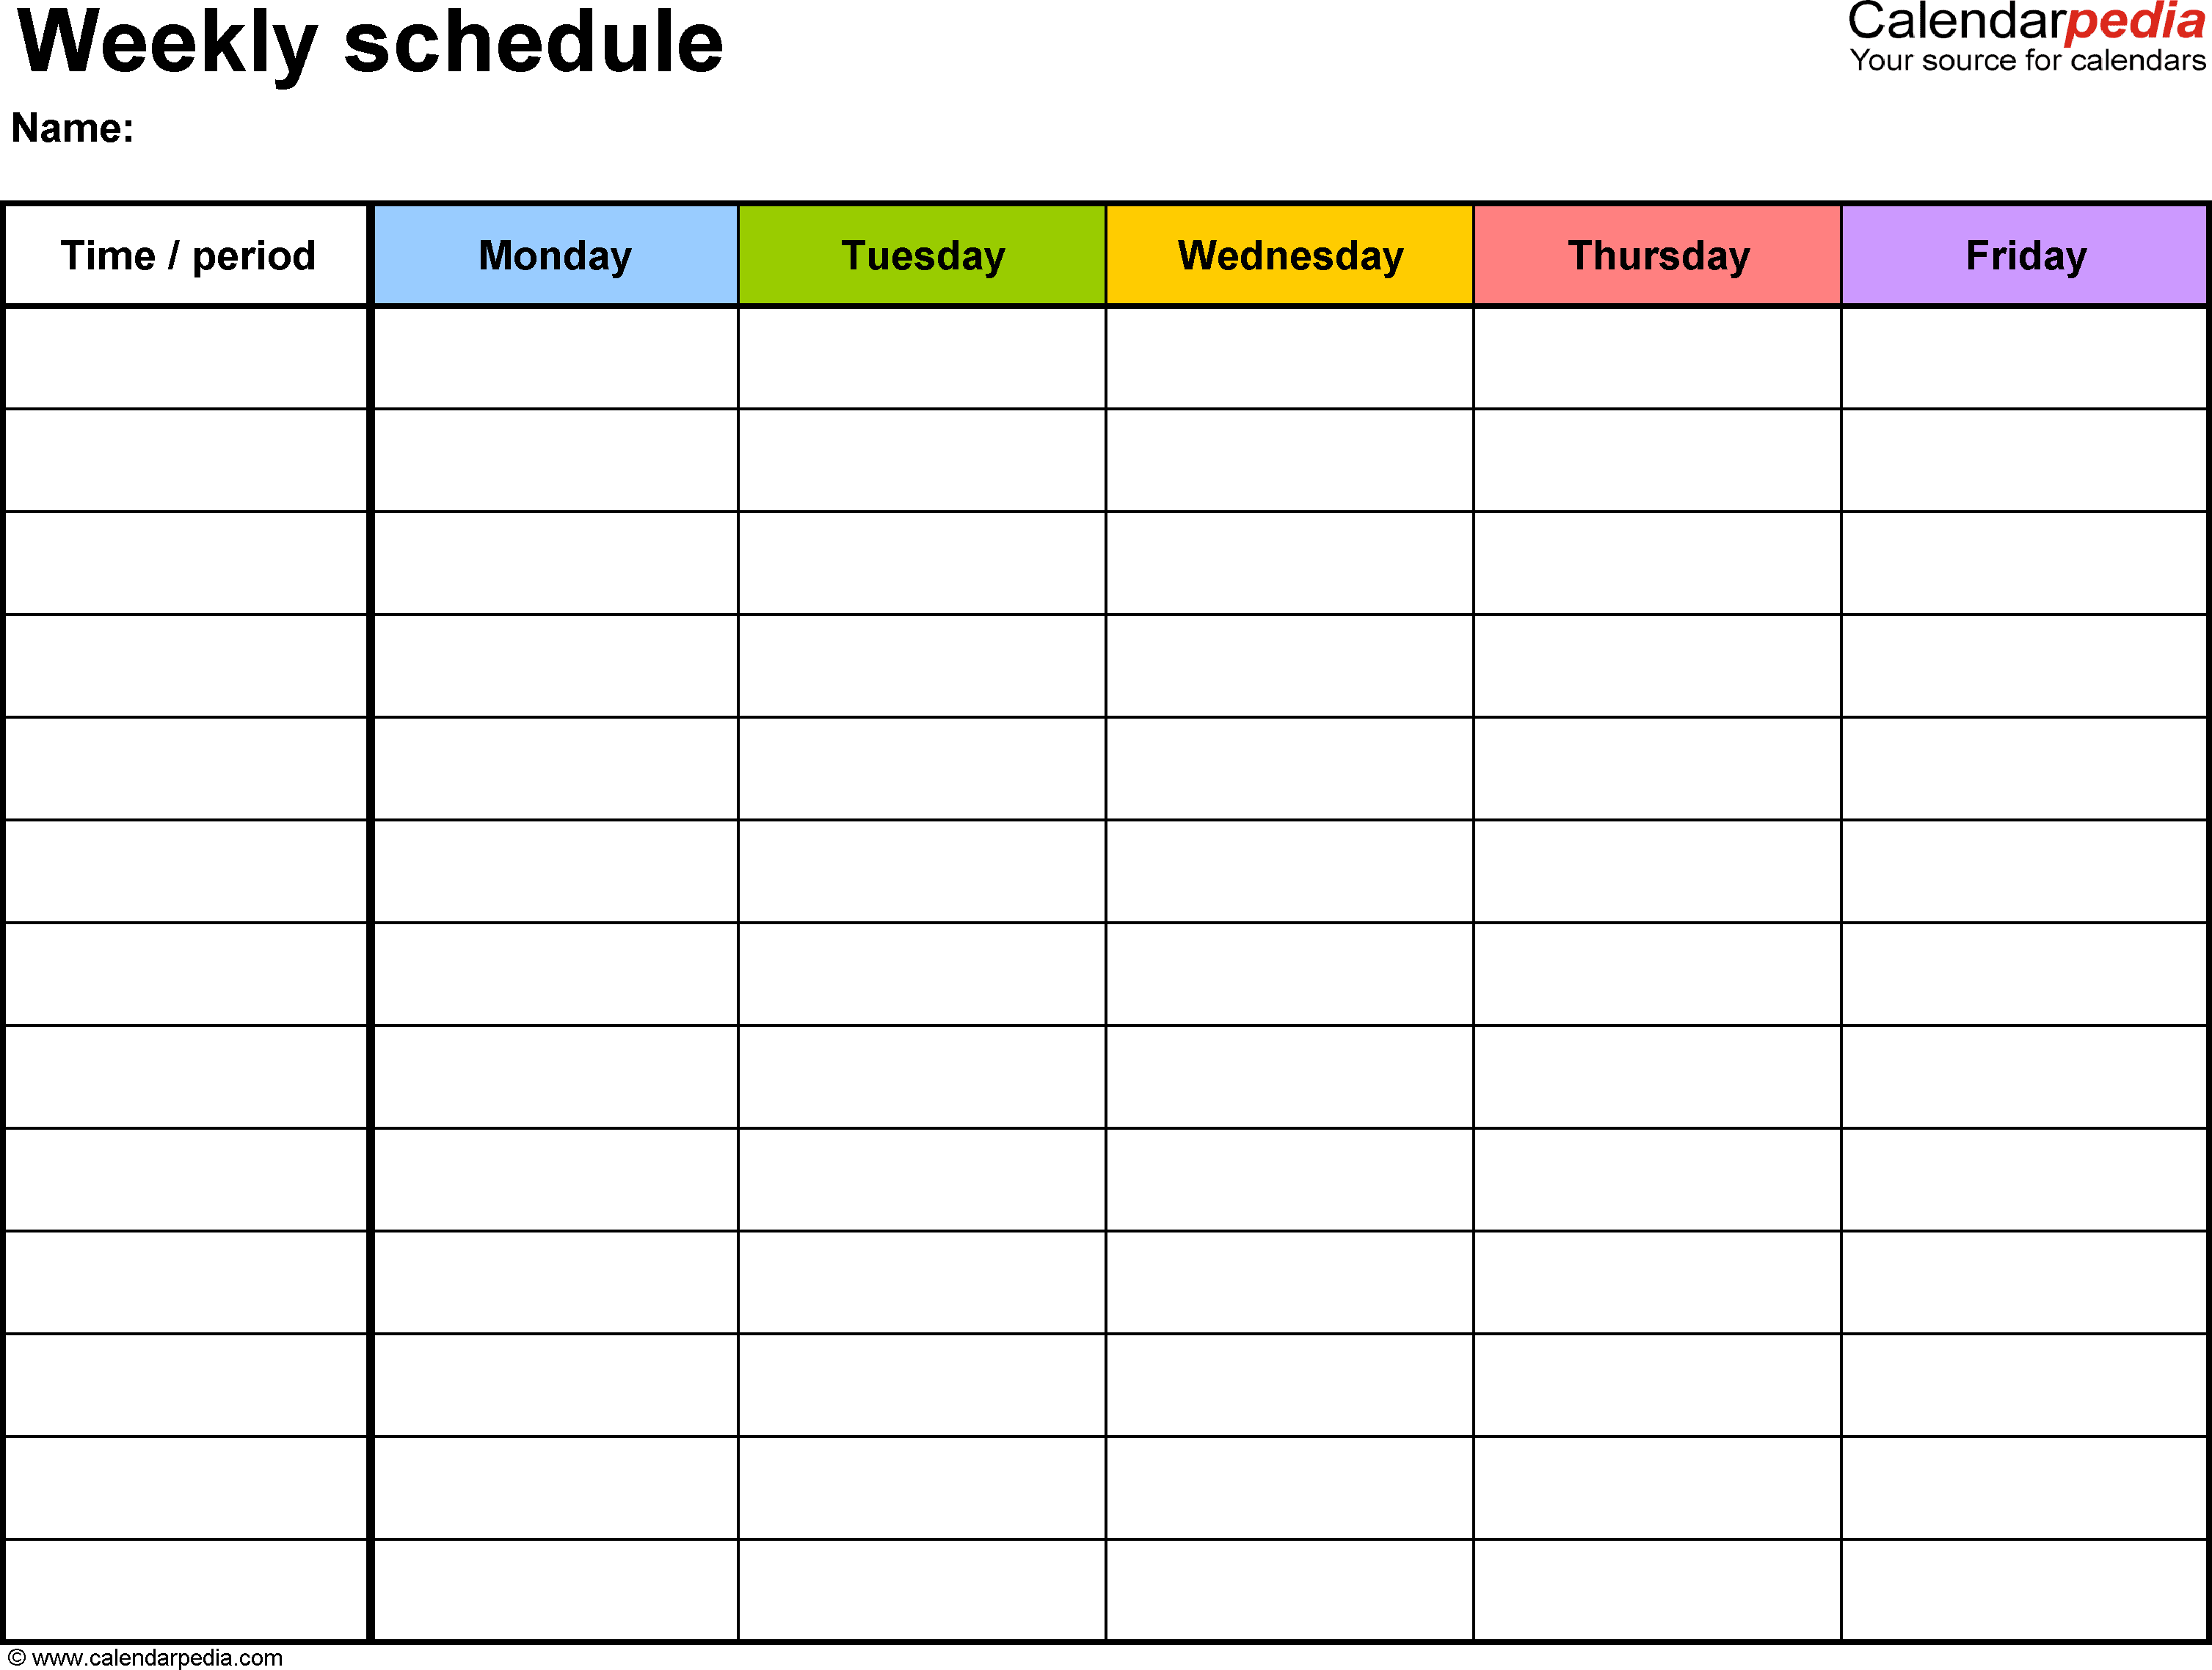 Weekly College Schedule Template from legaldbol.com